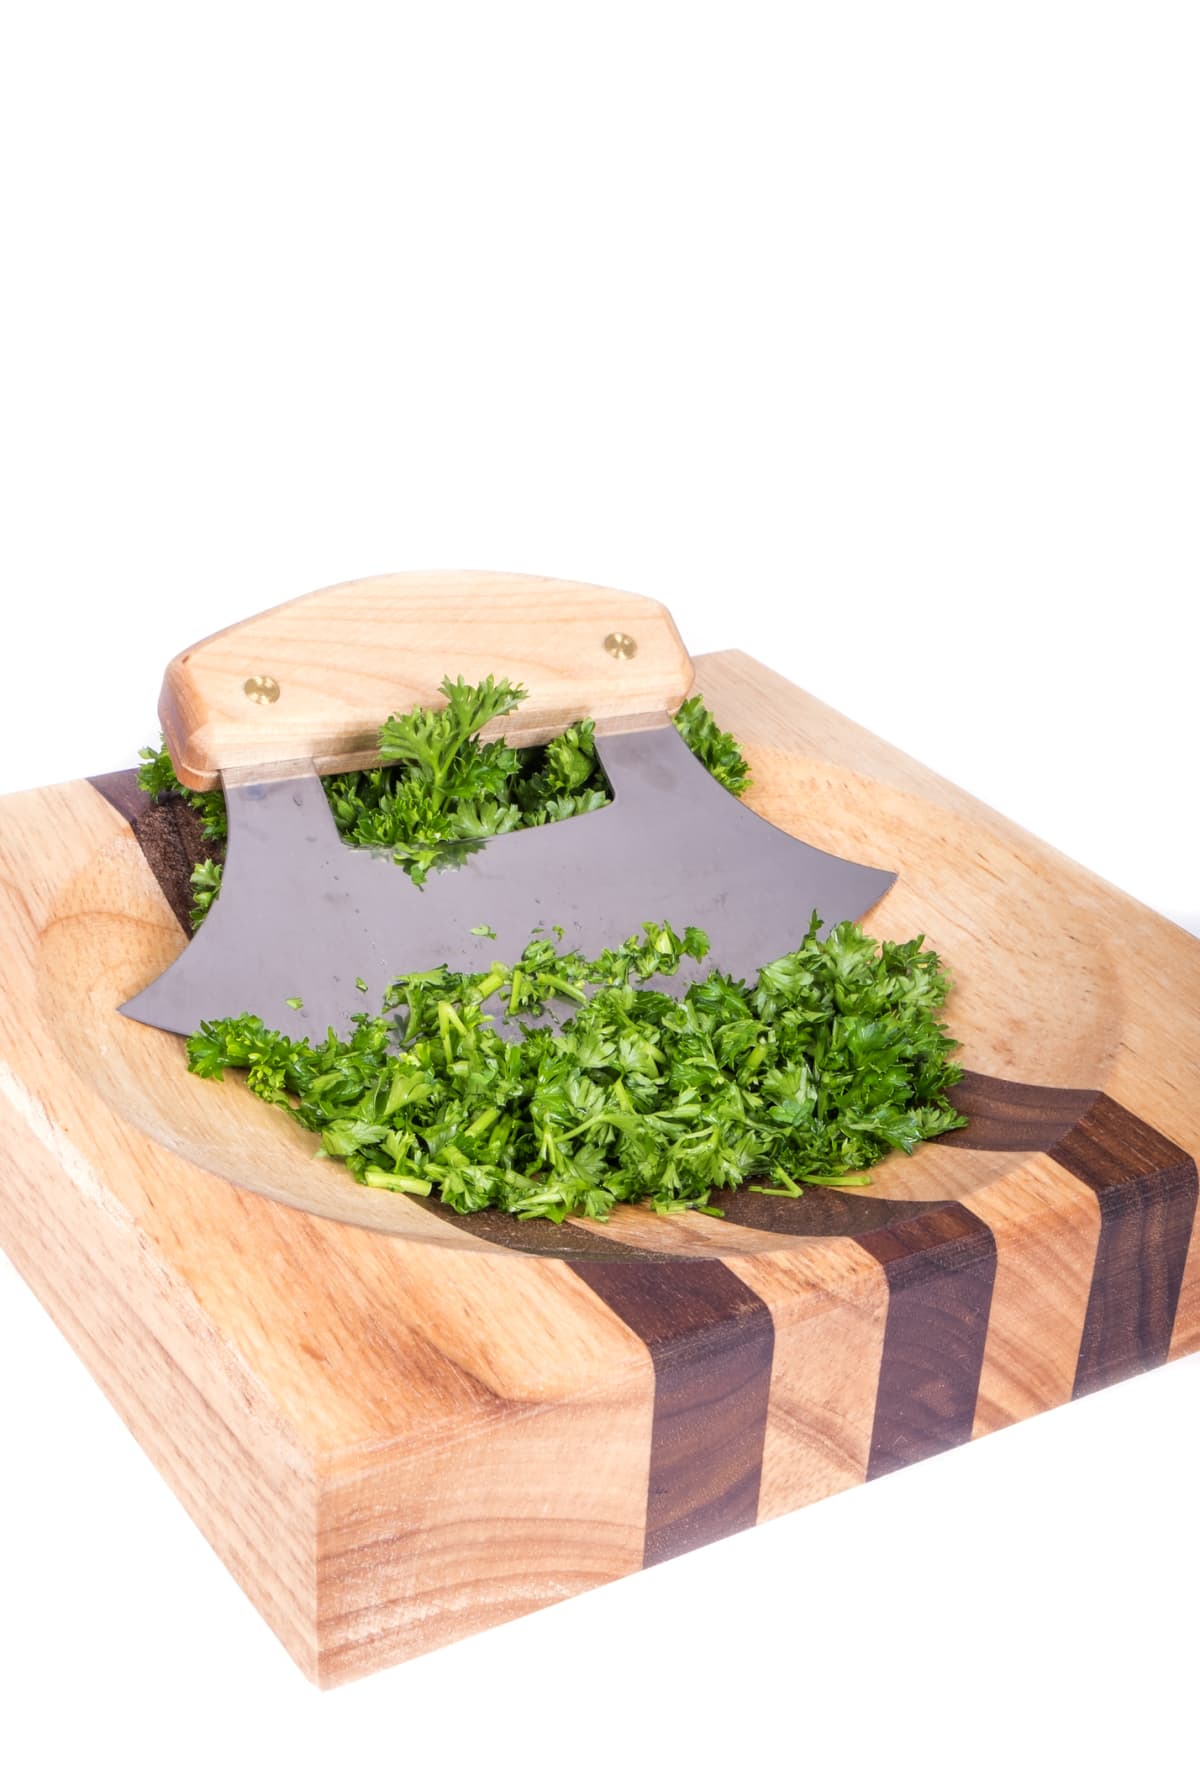 An Alaskan ulu knife and chopped green parsley on a striped wooden chopping block isolated on white.